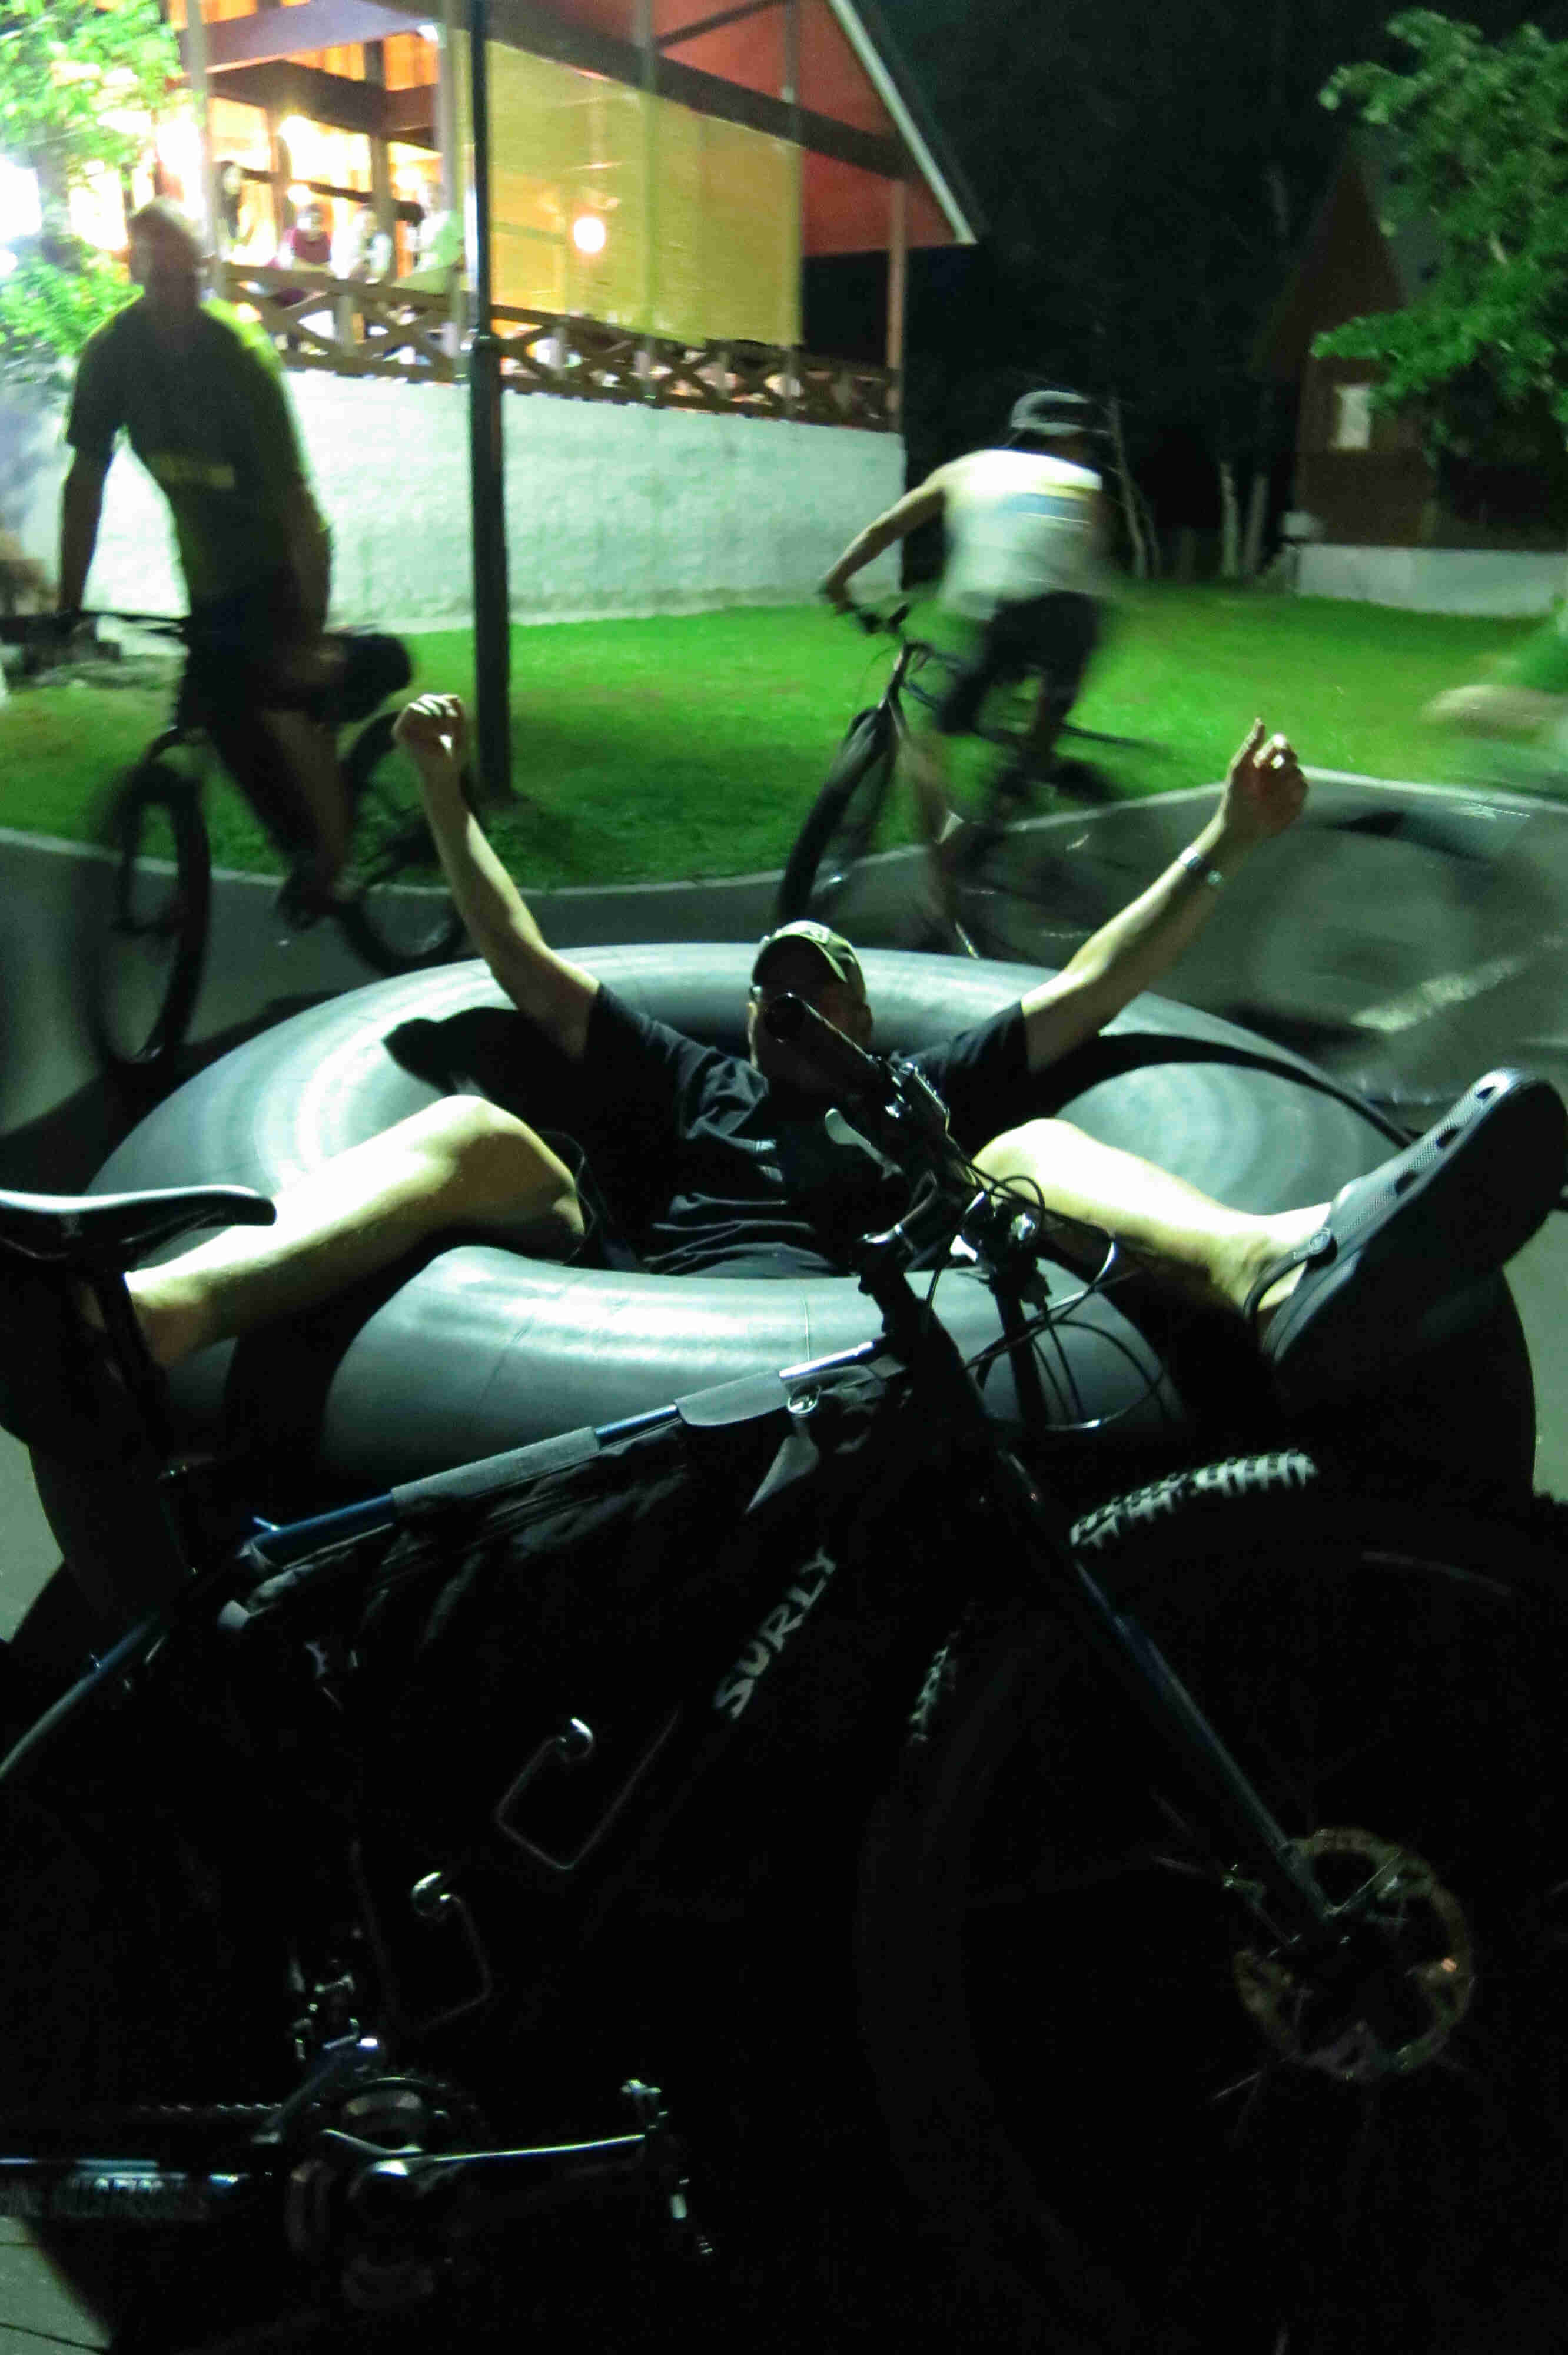 Right side view of Surly fat bike, leaning on a large inner tube with a person laying in it, on a parking lot at night 